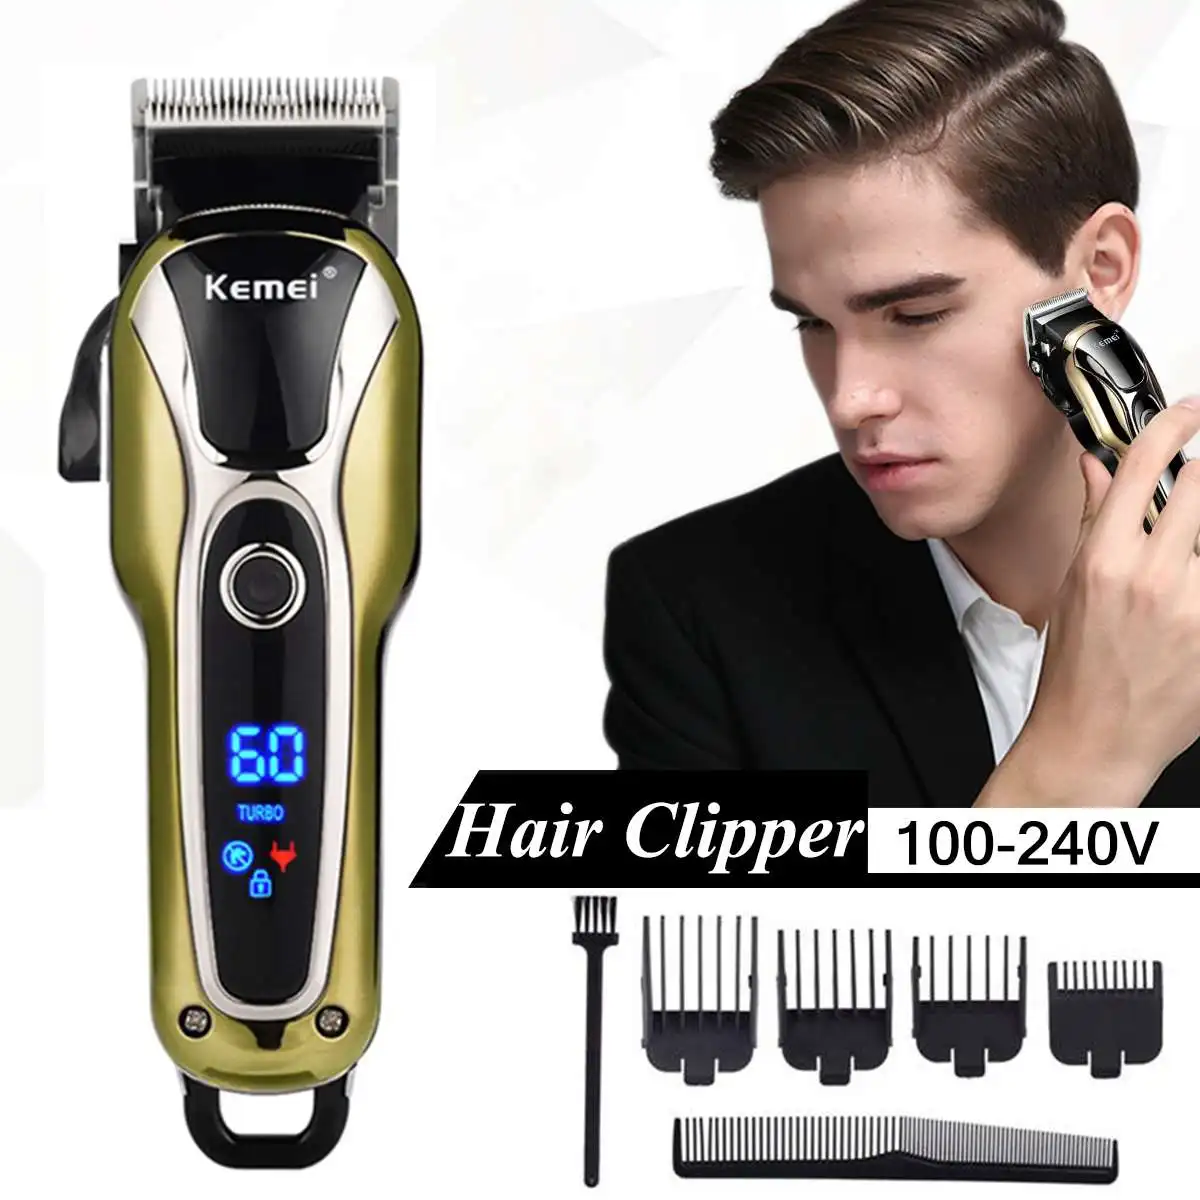 

KM-1990 Professional LCD Digital Hair Trimmer Men Hair Clipper Rechargeable Barber Salon Hair Cutting Tool Kit with 4 Limit Comb